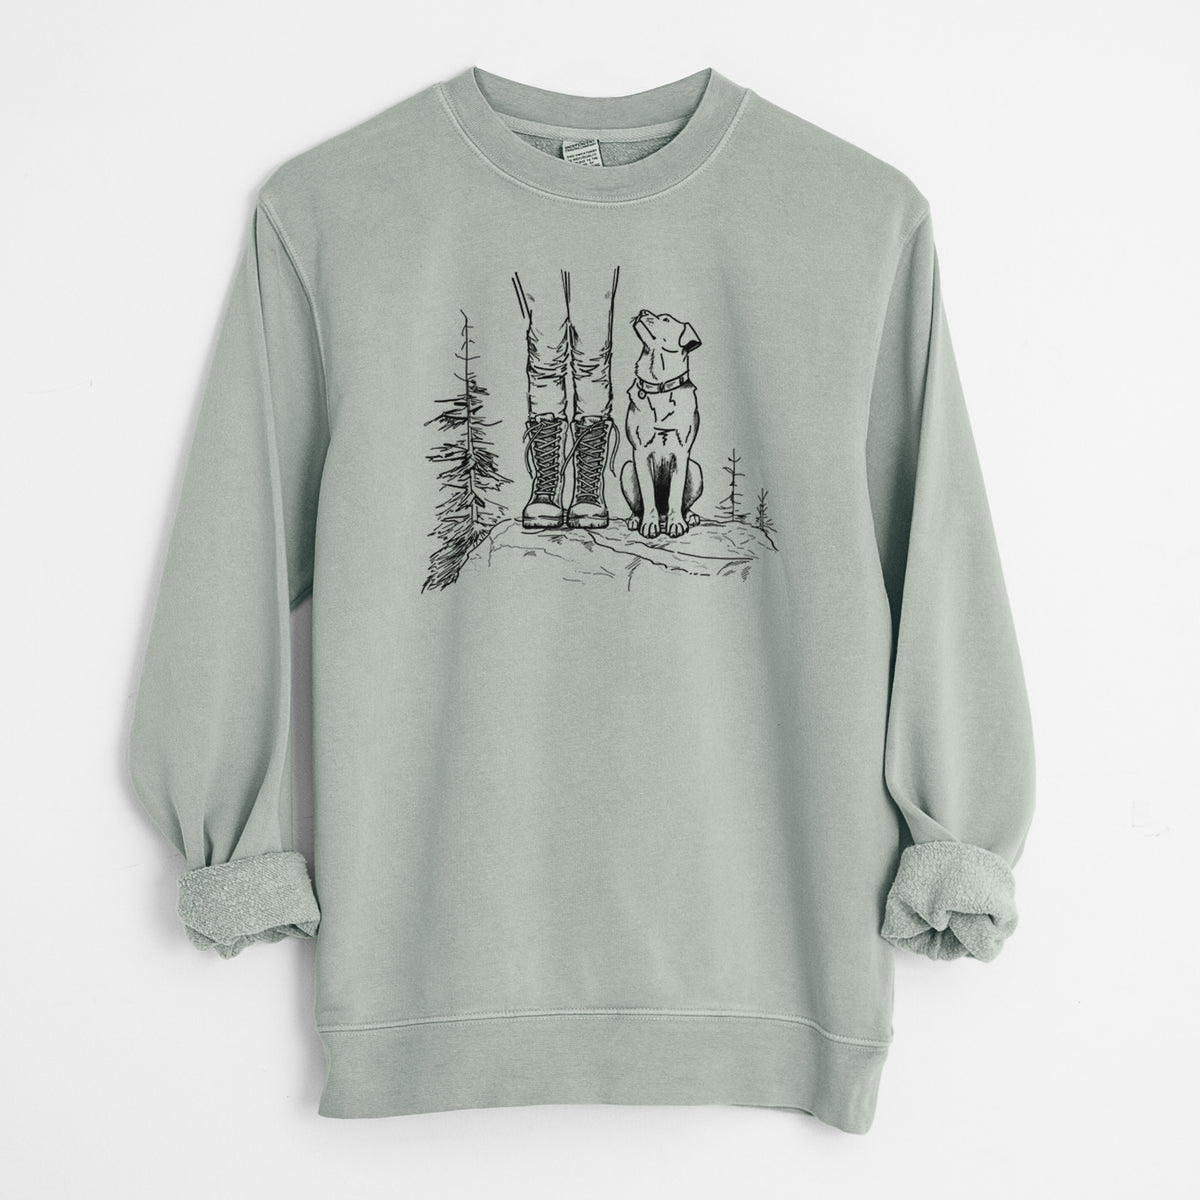 Trail Companions - Hiking with Dogs - Unisex Pigment Dyed Crew Sweatshirt